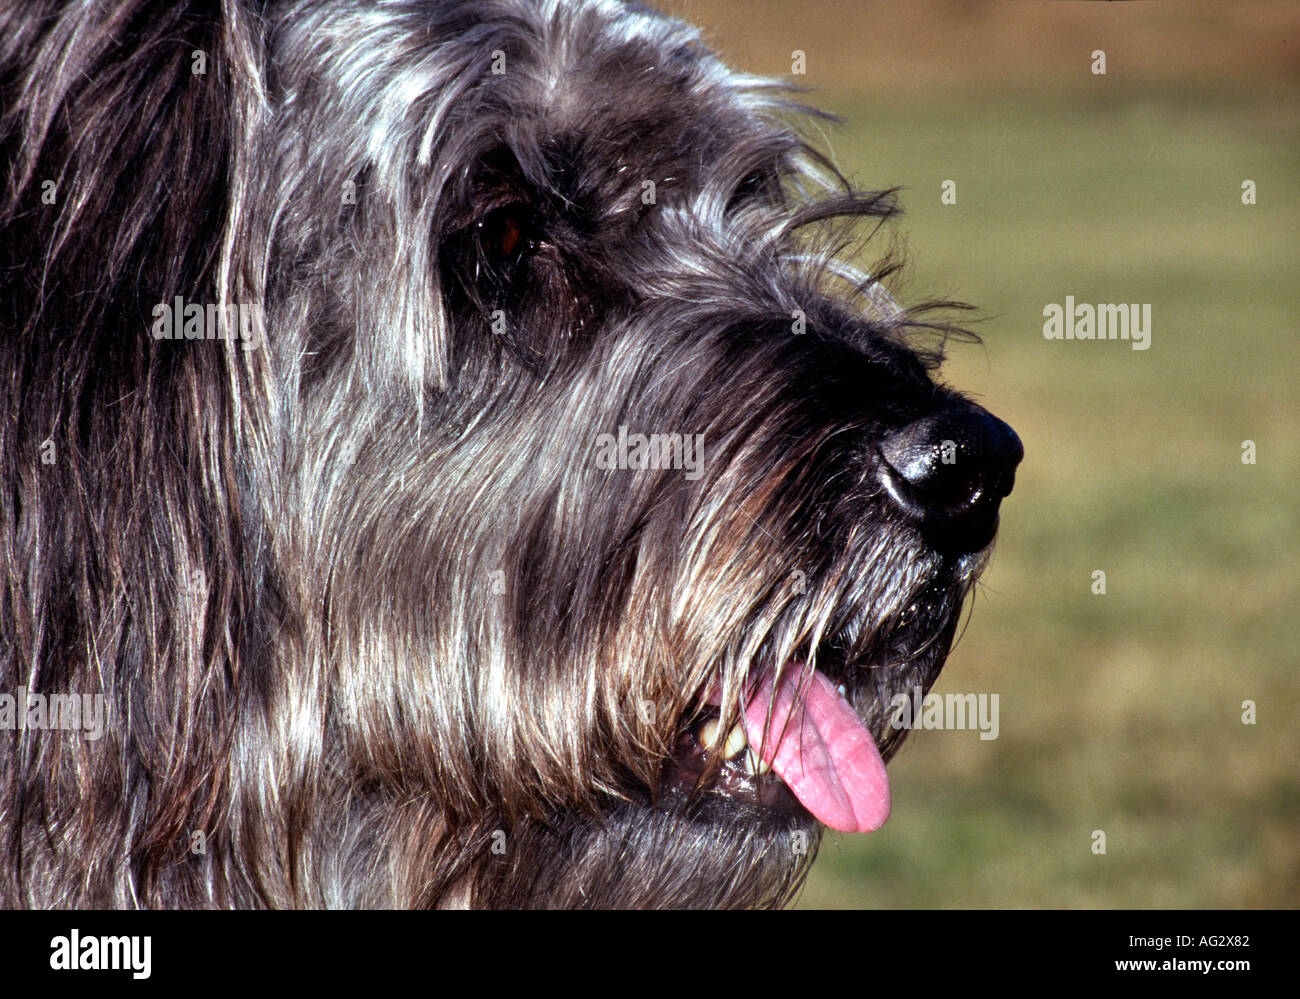 Schnautzer High Resolution Stock Photography and Images - Alamy